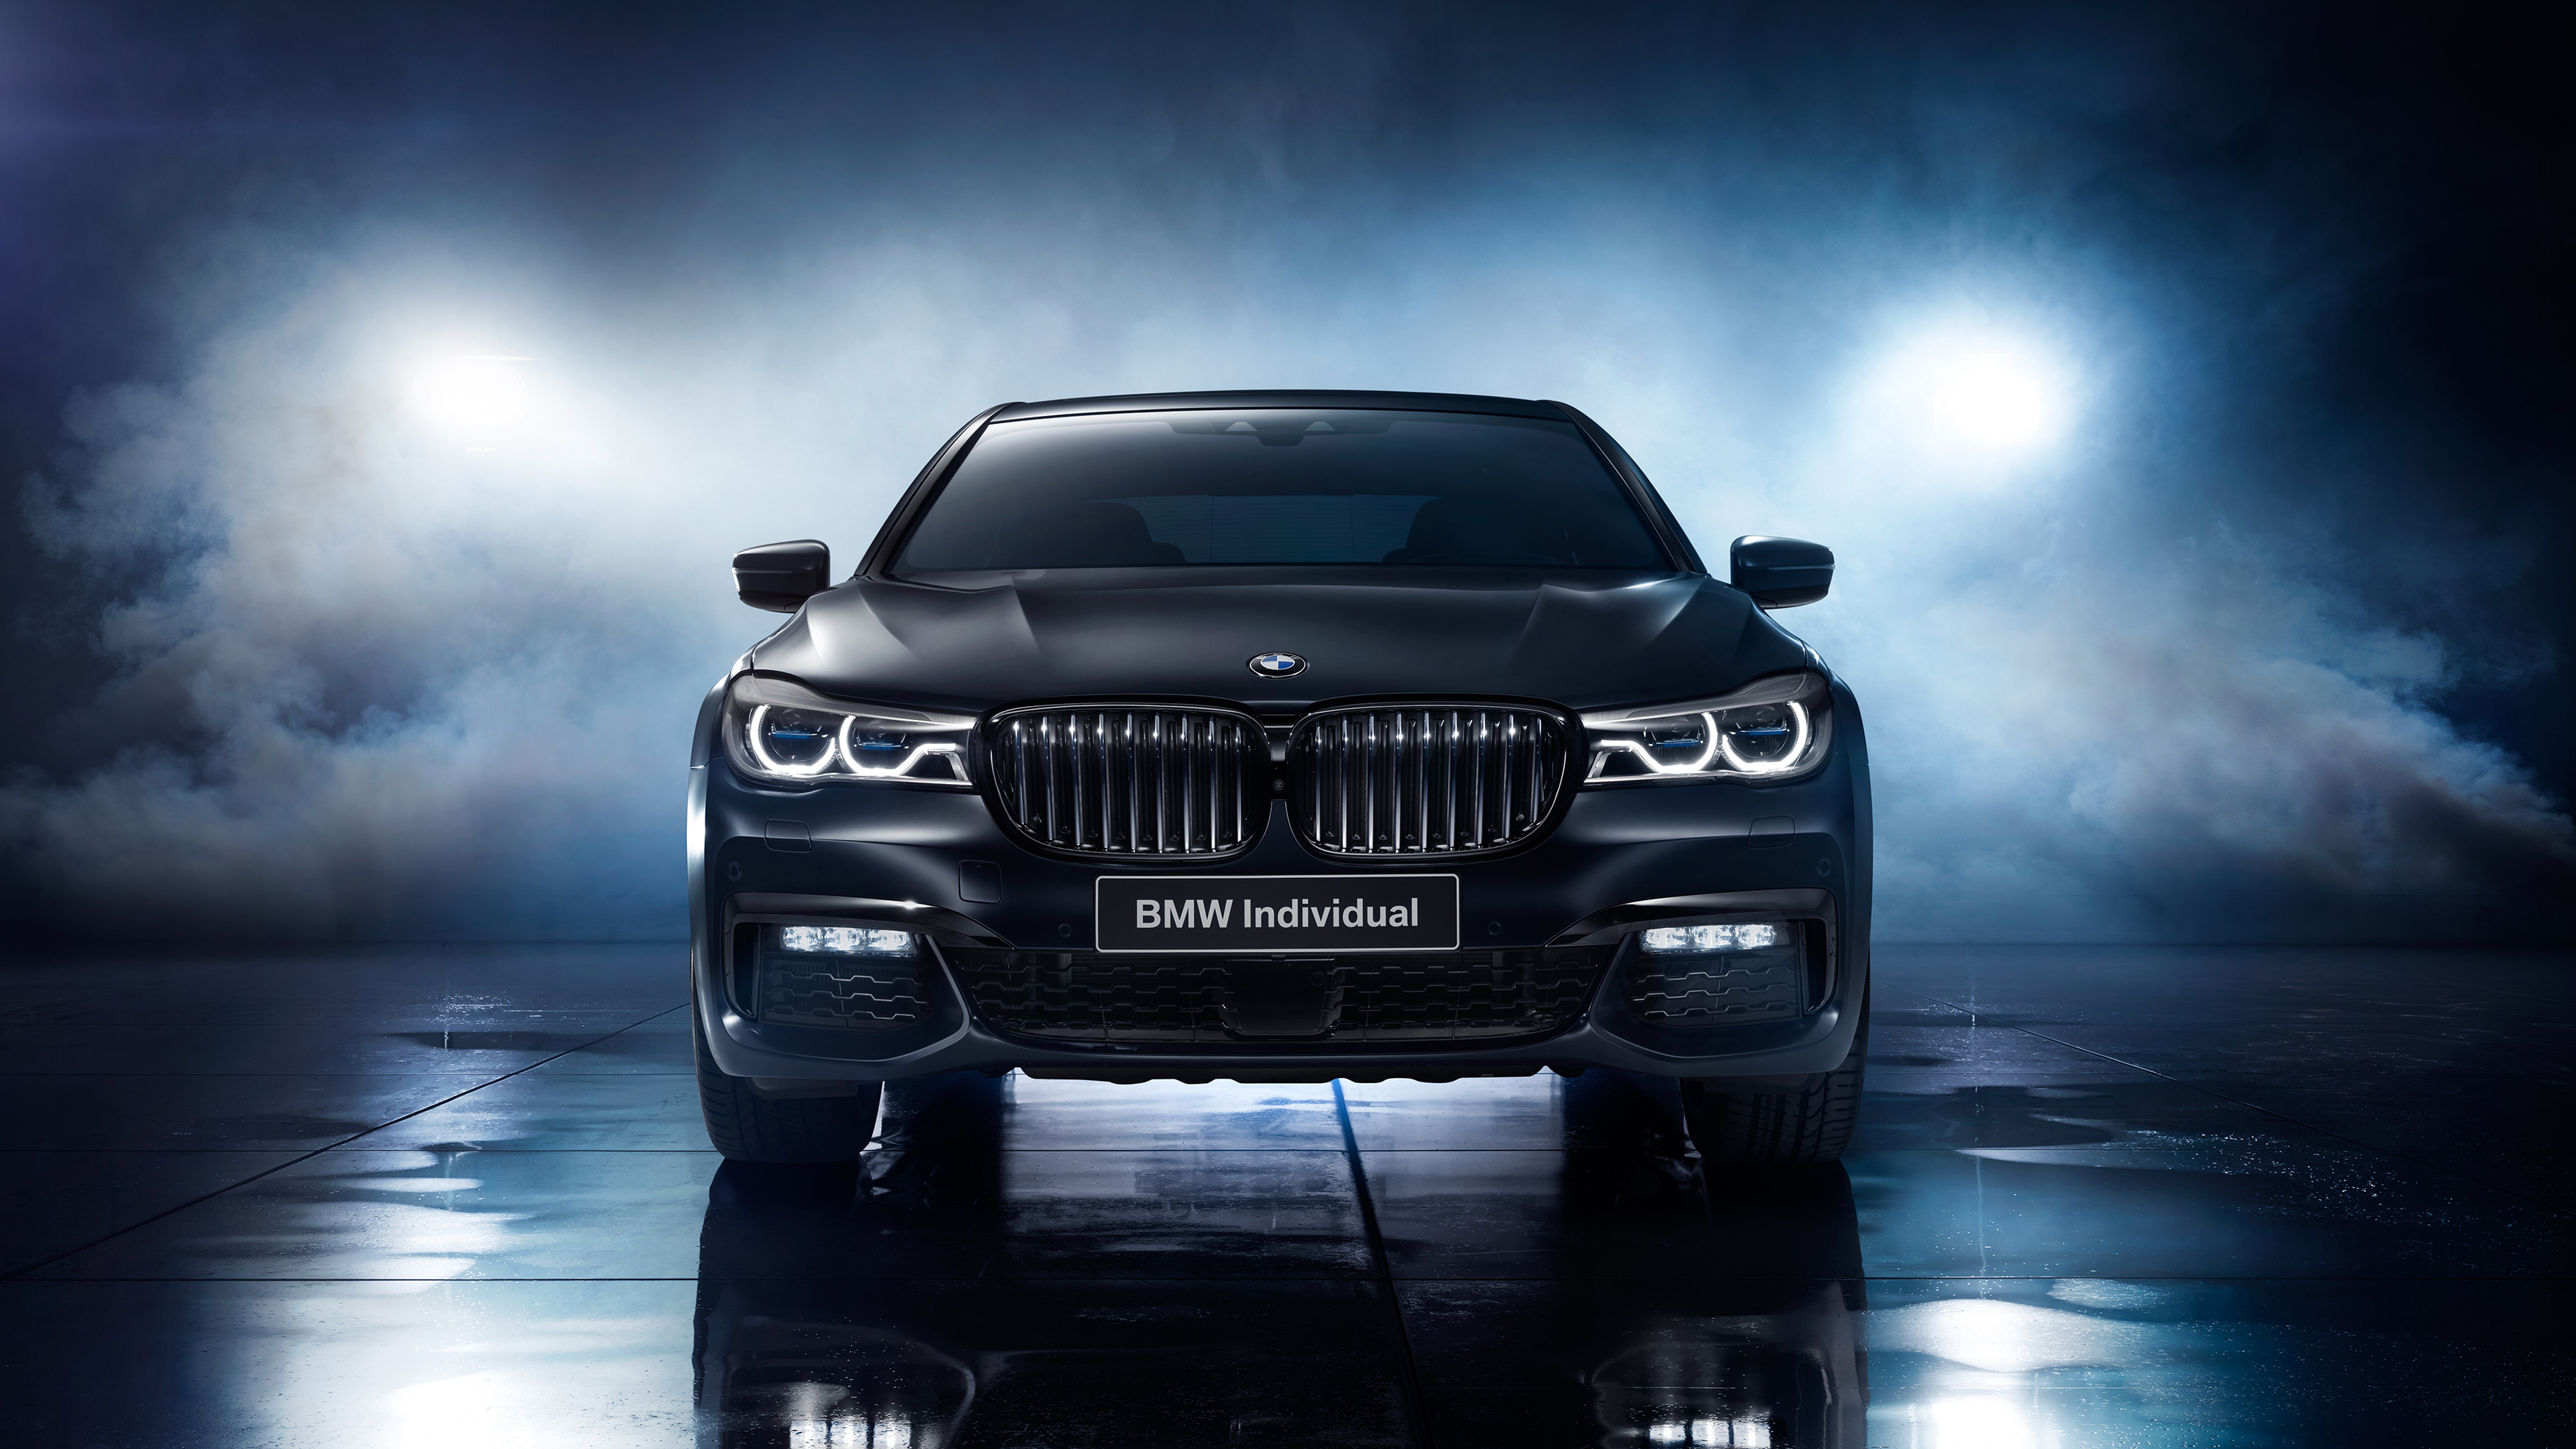 2017 BMW 7 series Black Ice Edition Wallpaper - HD Car Wallpapers #8891